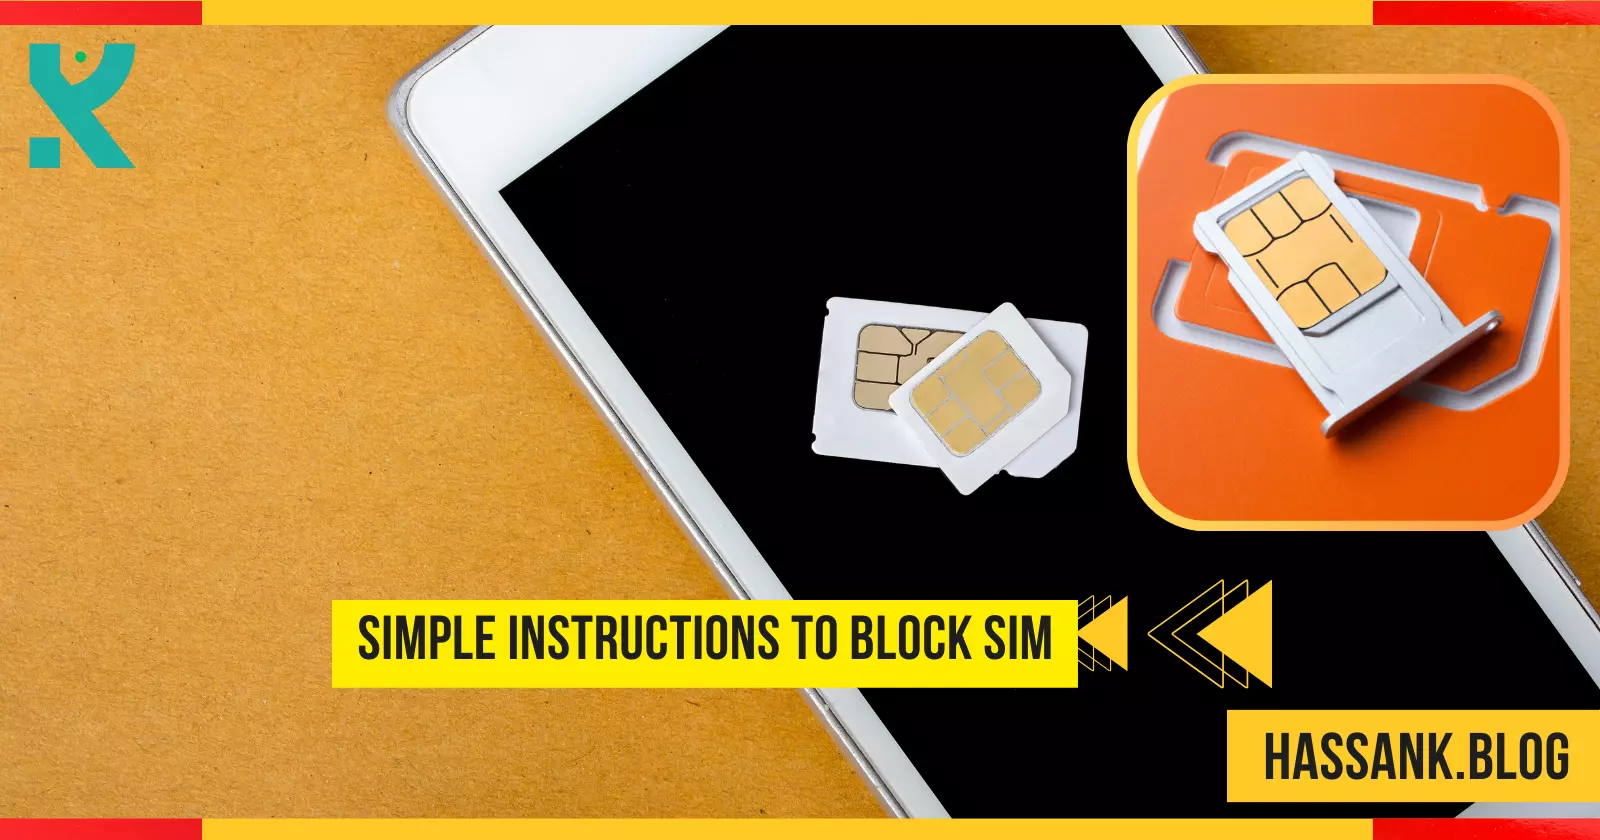 Simple Instructions to Block SIM for Jazz, Zong, Telenor, and Ufone